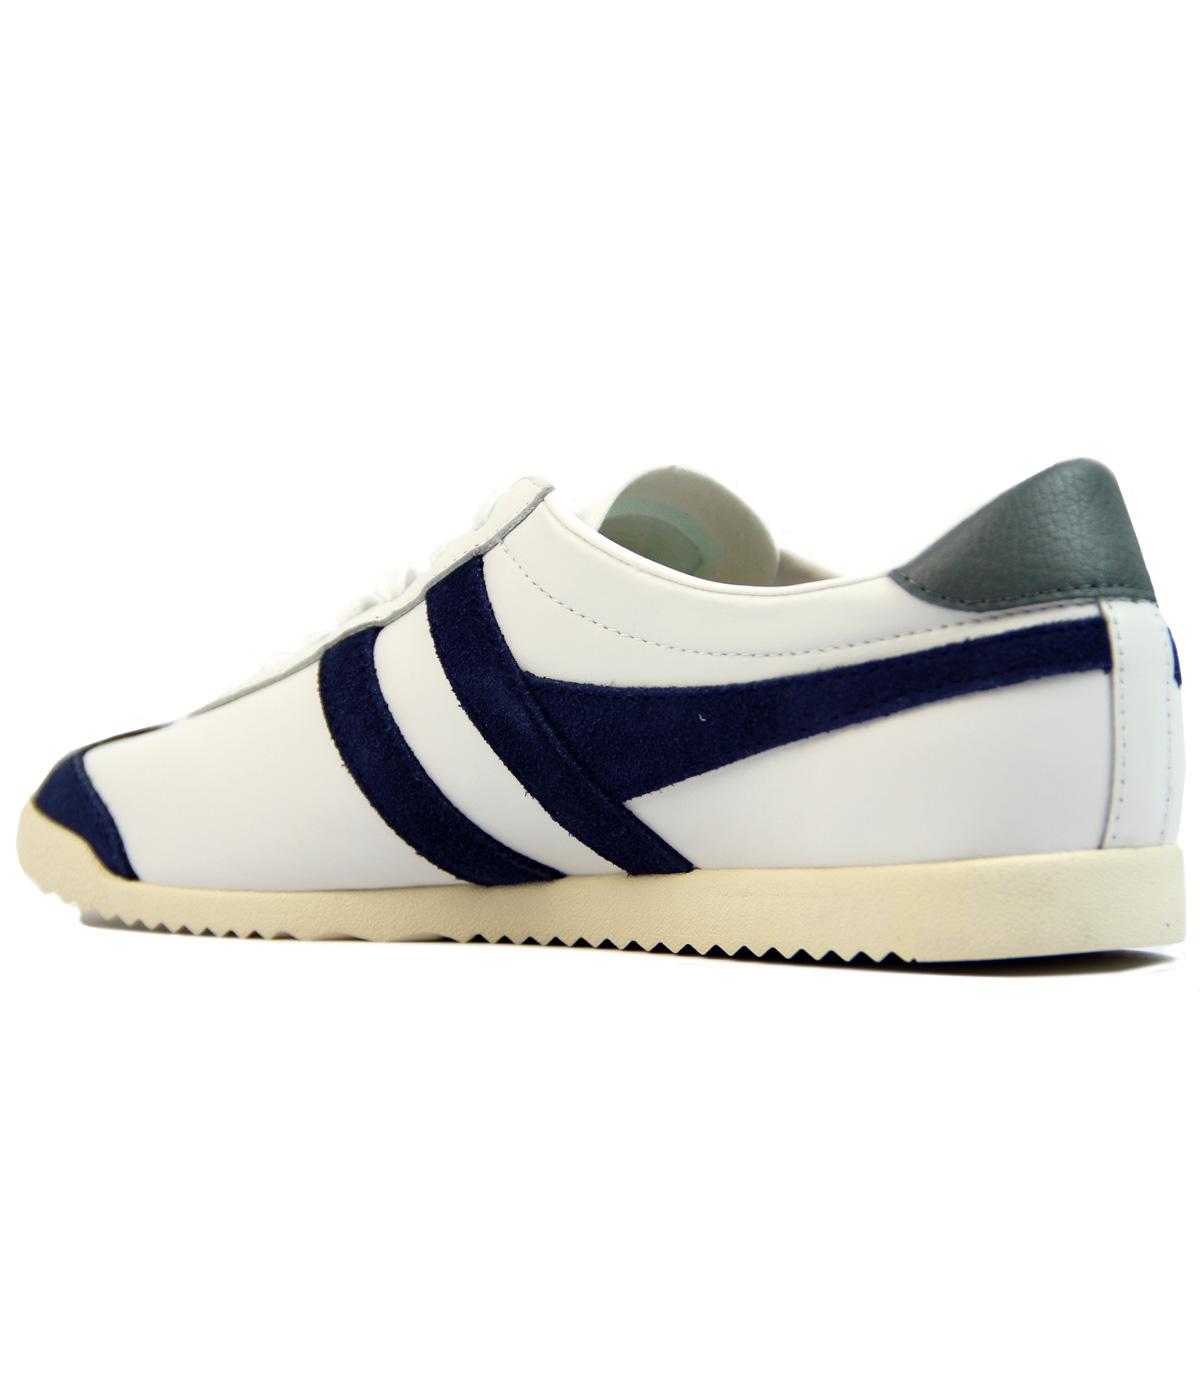 GOLA Bullet Retro Indie Leather Trainers in White/Navy